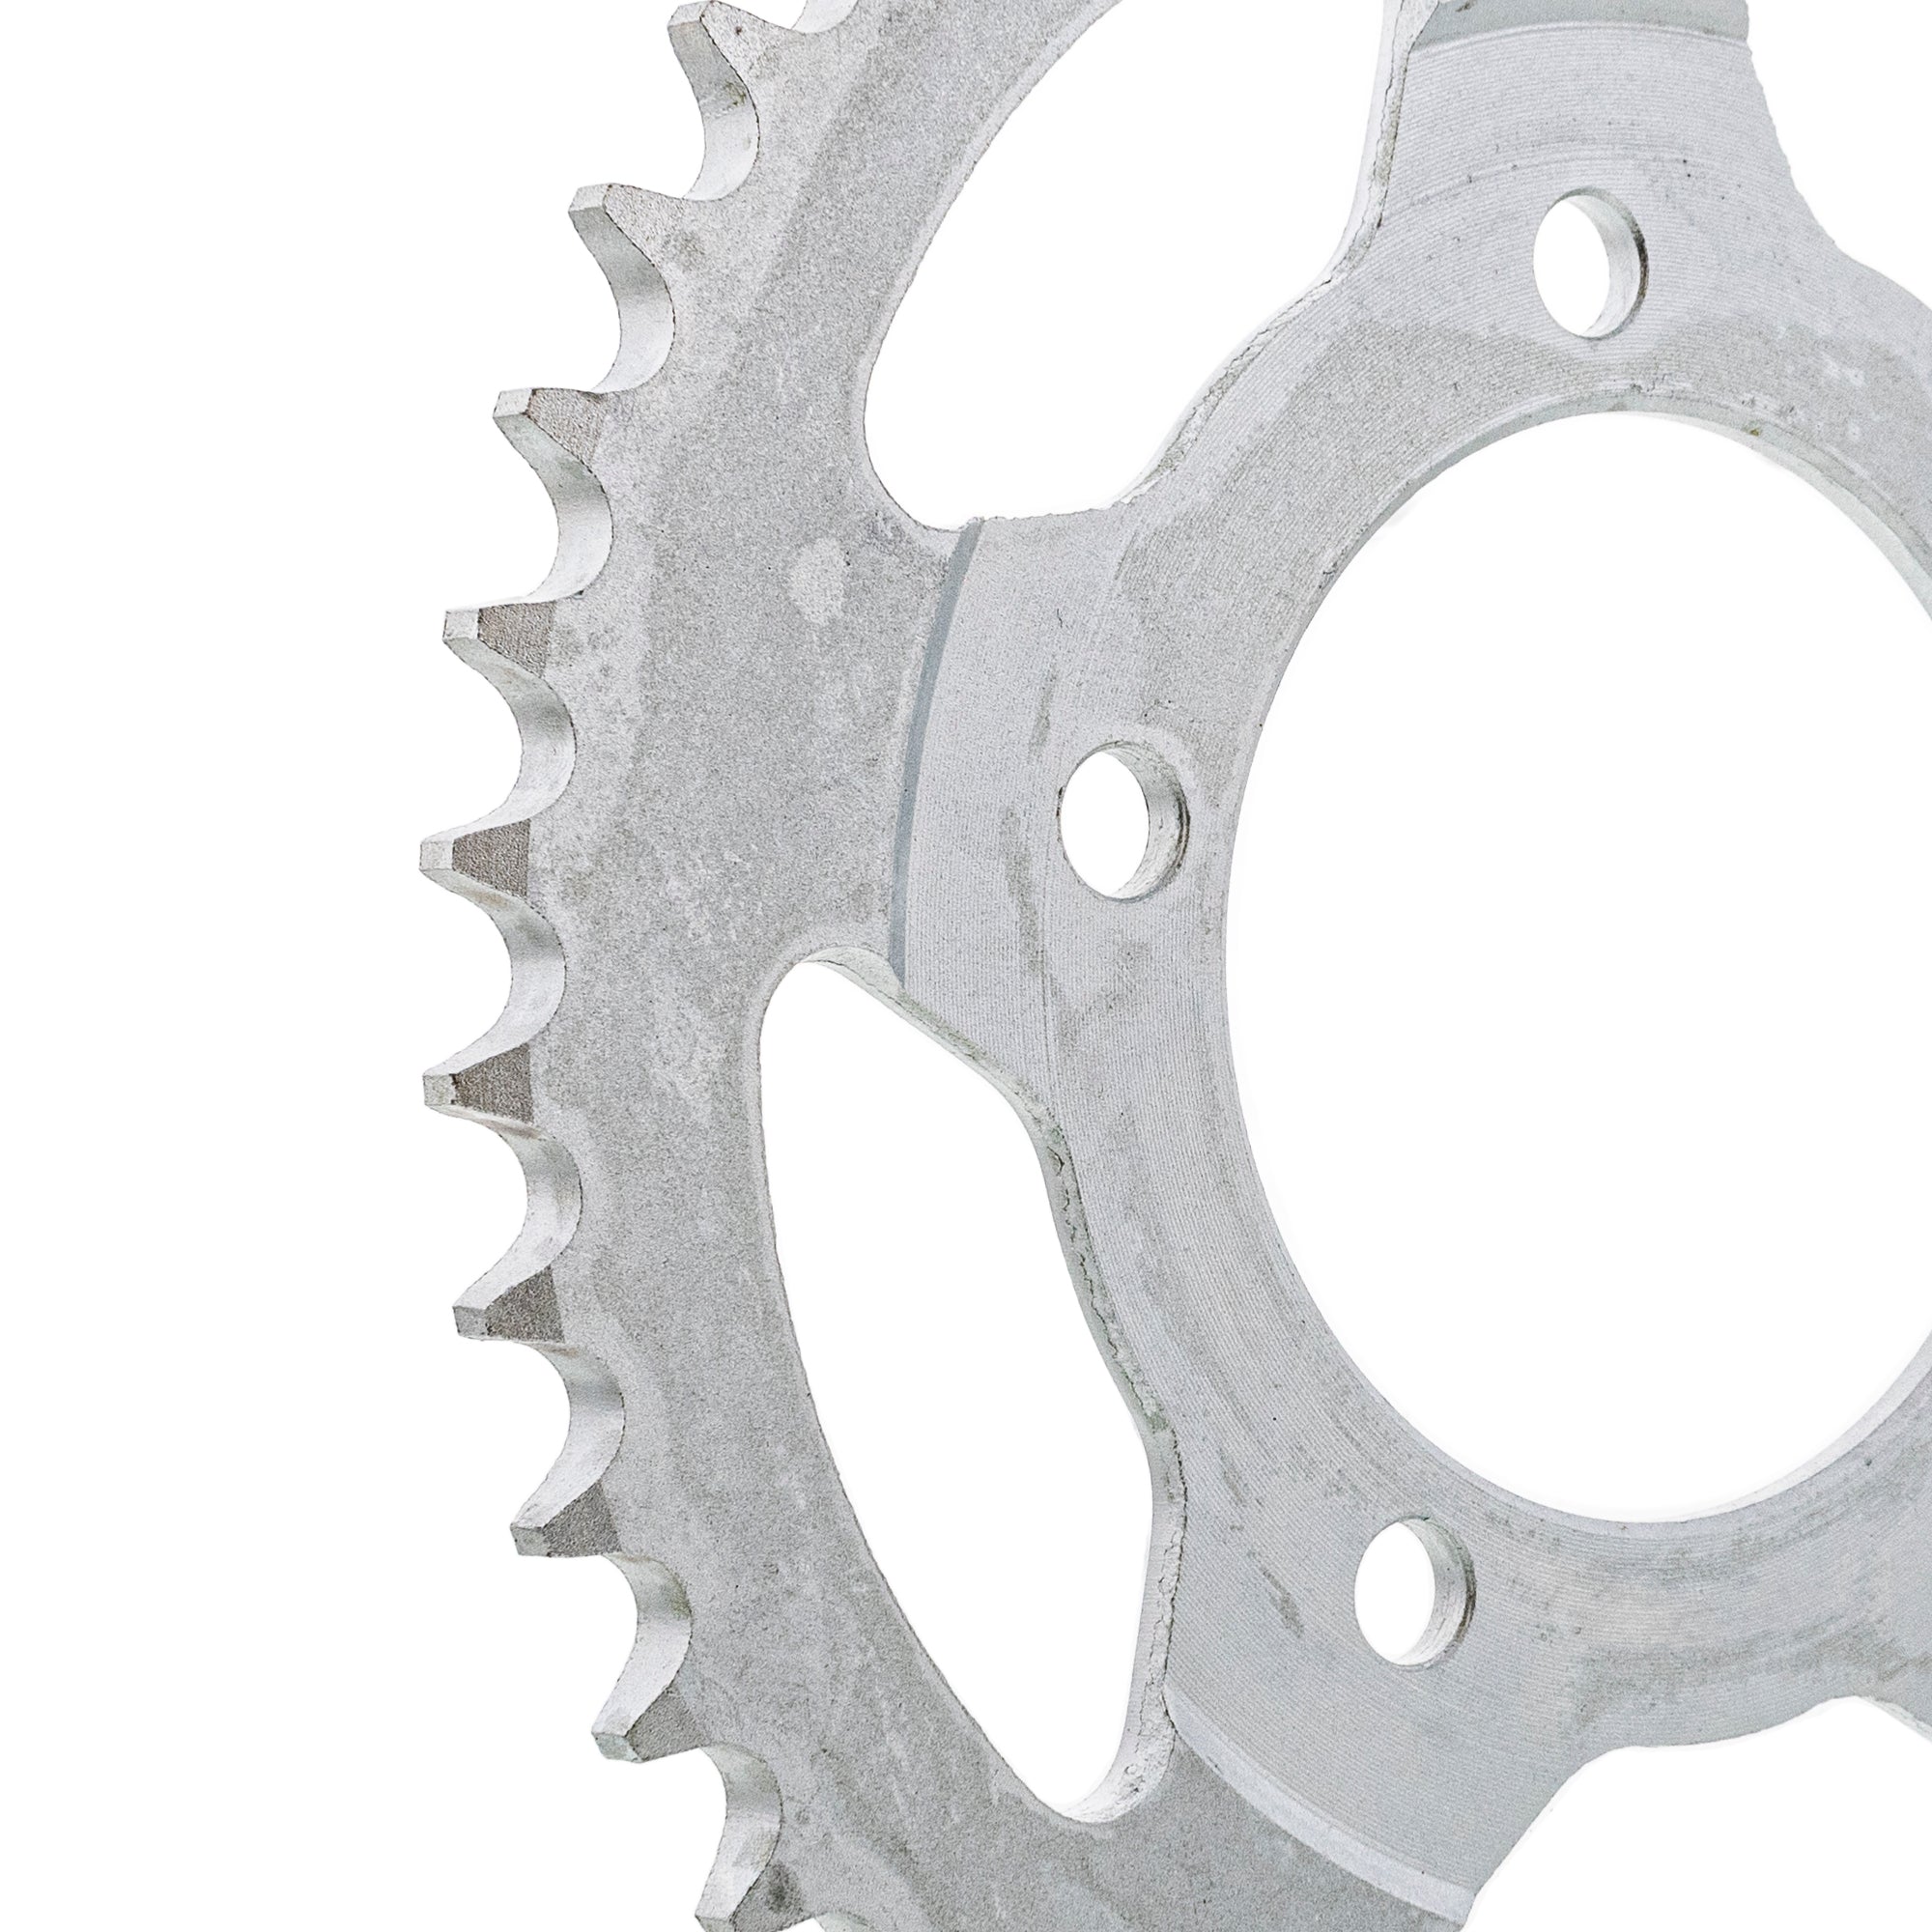 525 Pitch 44 Tooth Rear Drive Sprocket for Suzuki SV650 SV650S SV650A